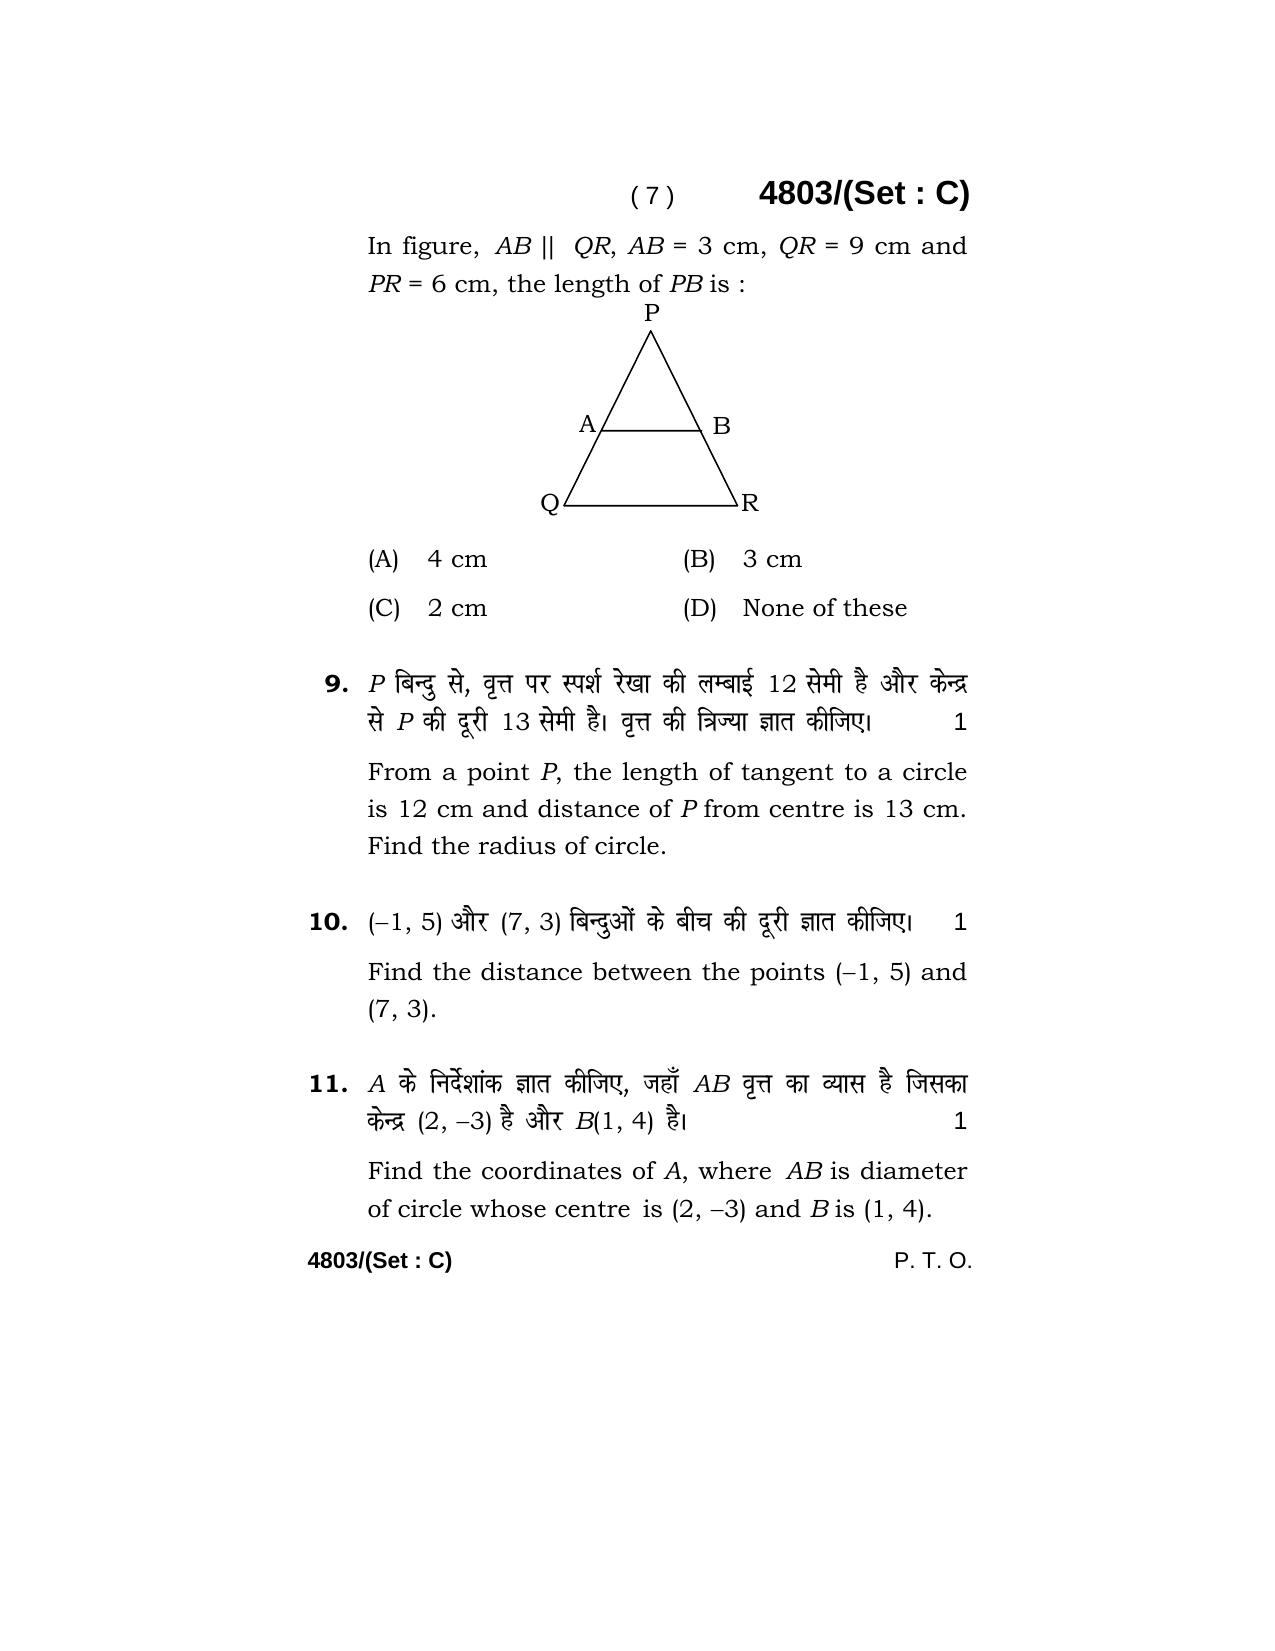 Haryana Board HBSE Class 10 Mathematics 2020 Question Paper - Page 39